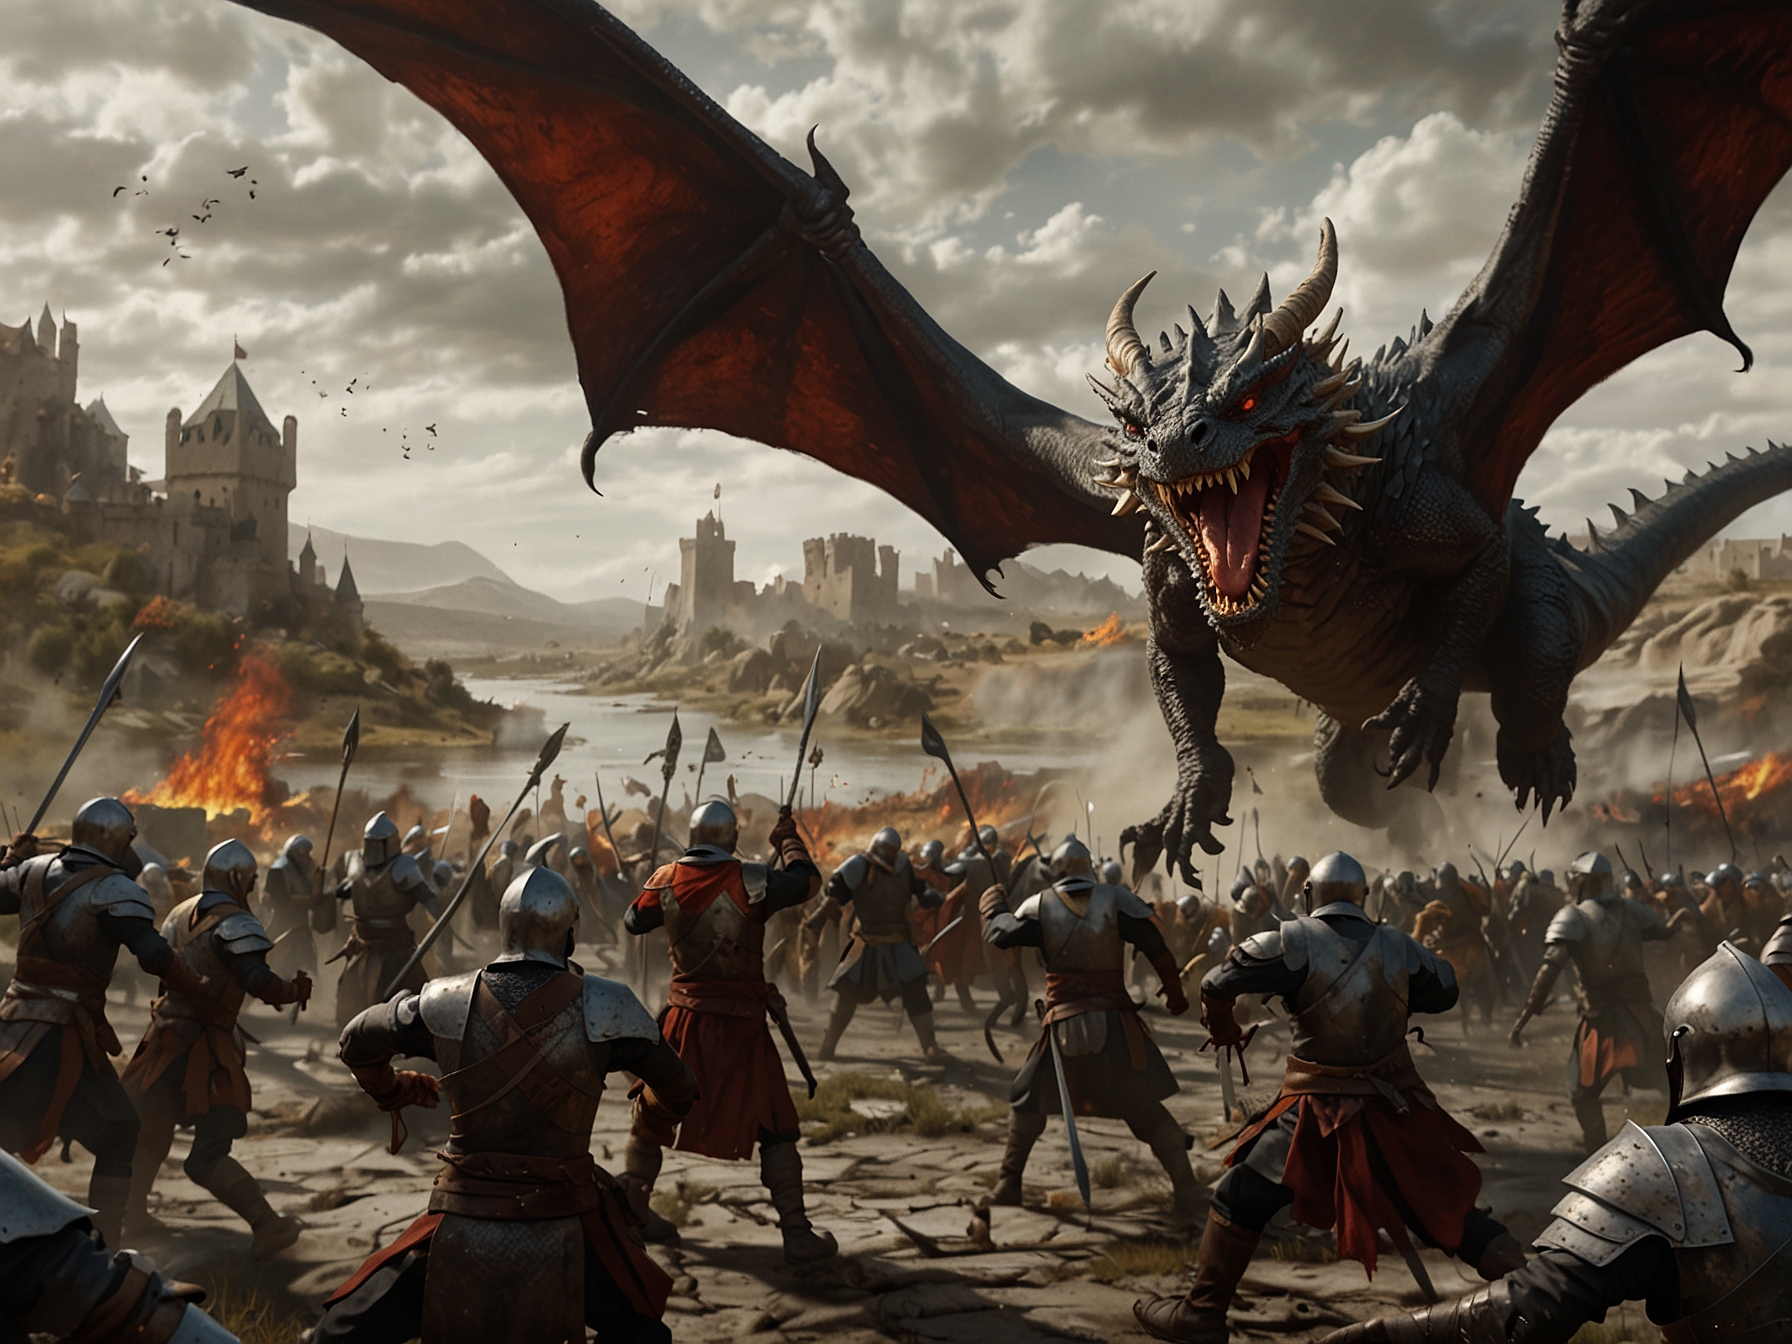 A vivid depiction of the Dance of the Dragons battle in the Riverlands, highlighting the intense combat, burning fields, and the involvement of various noble houses like the Tullys and the Blackwoods.